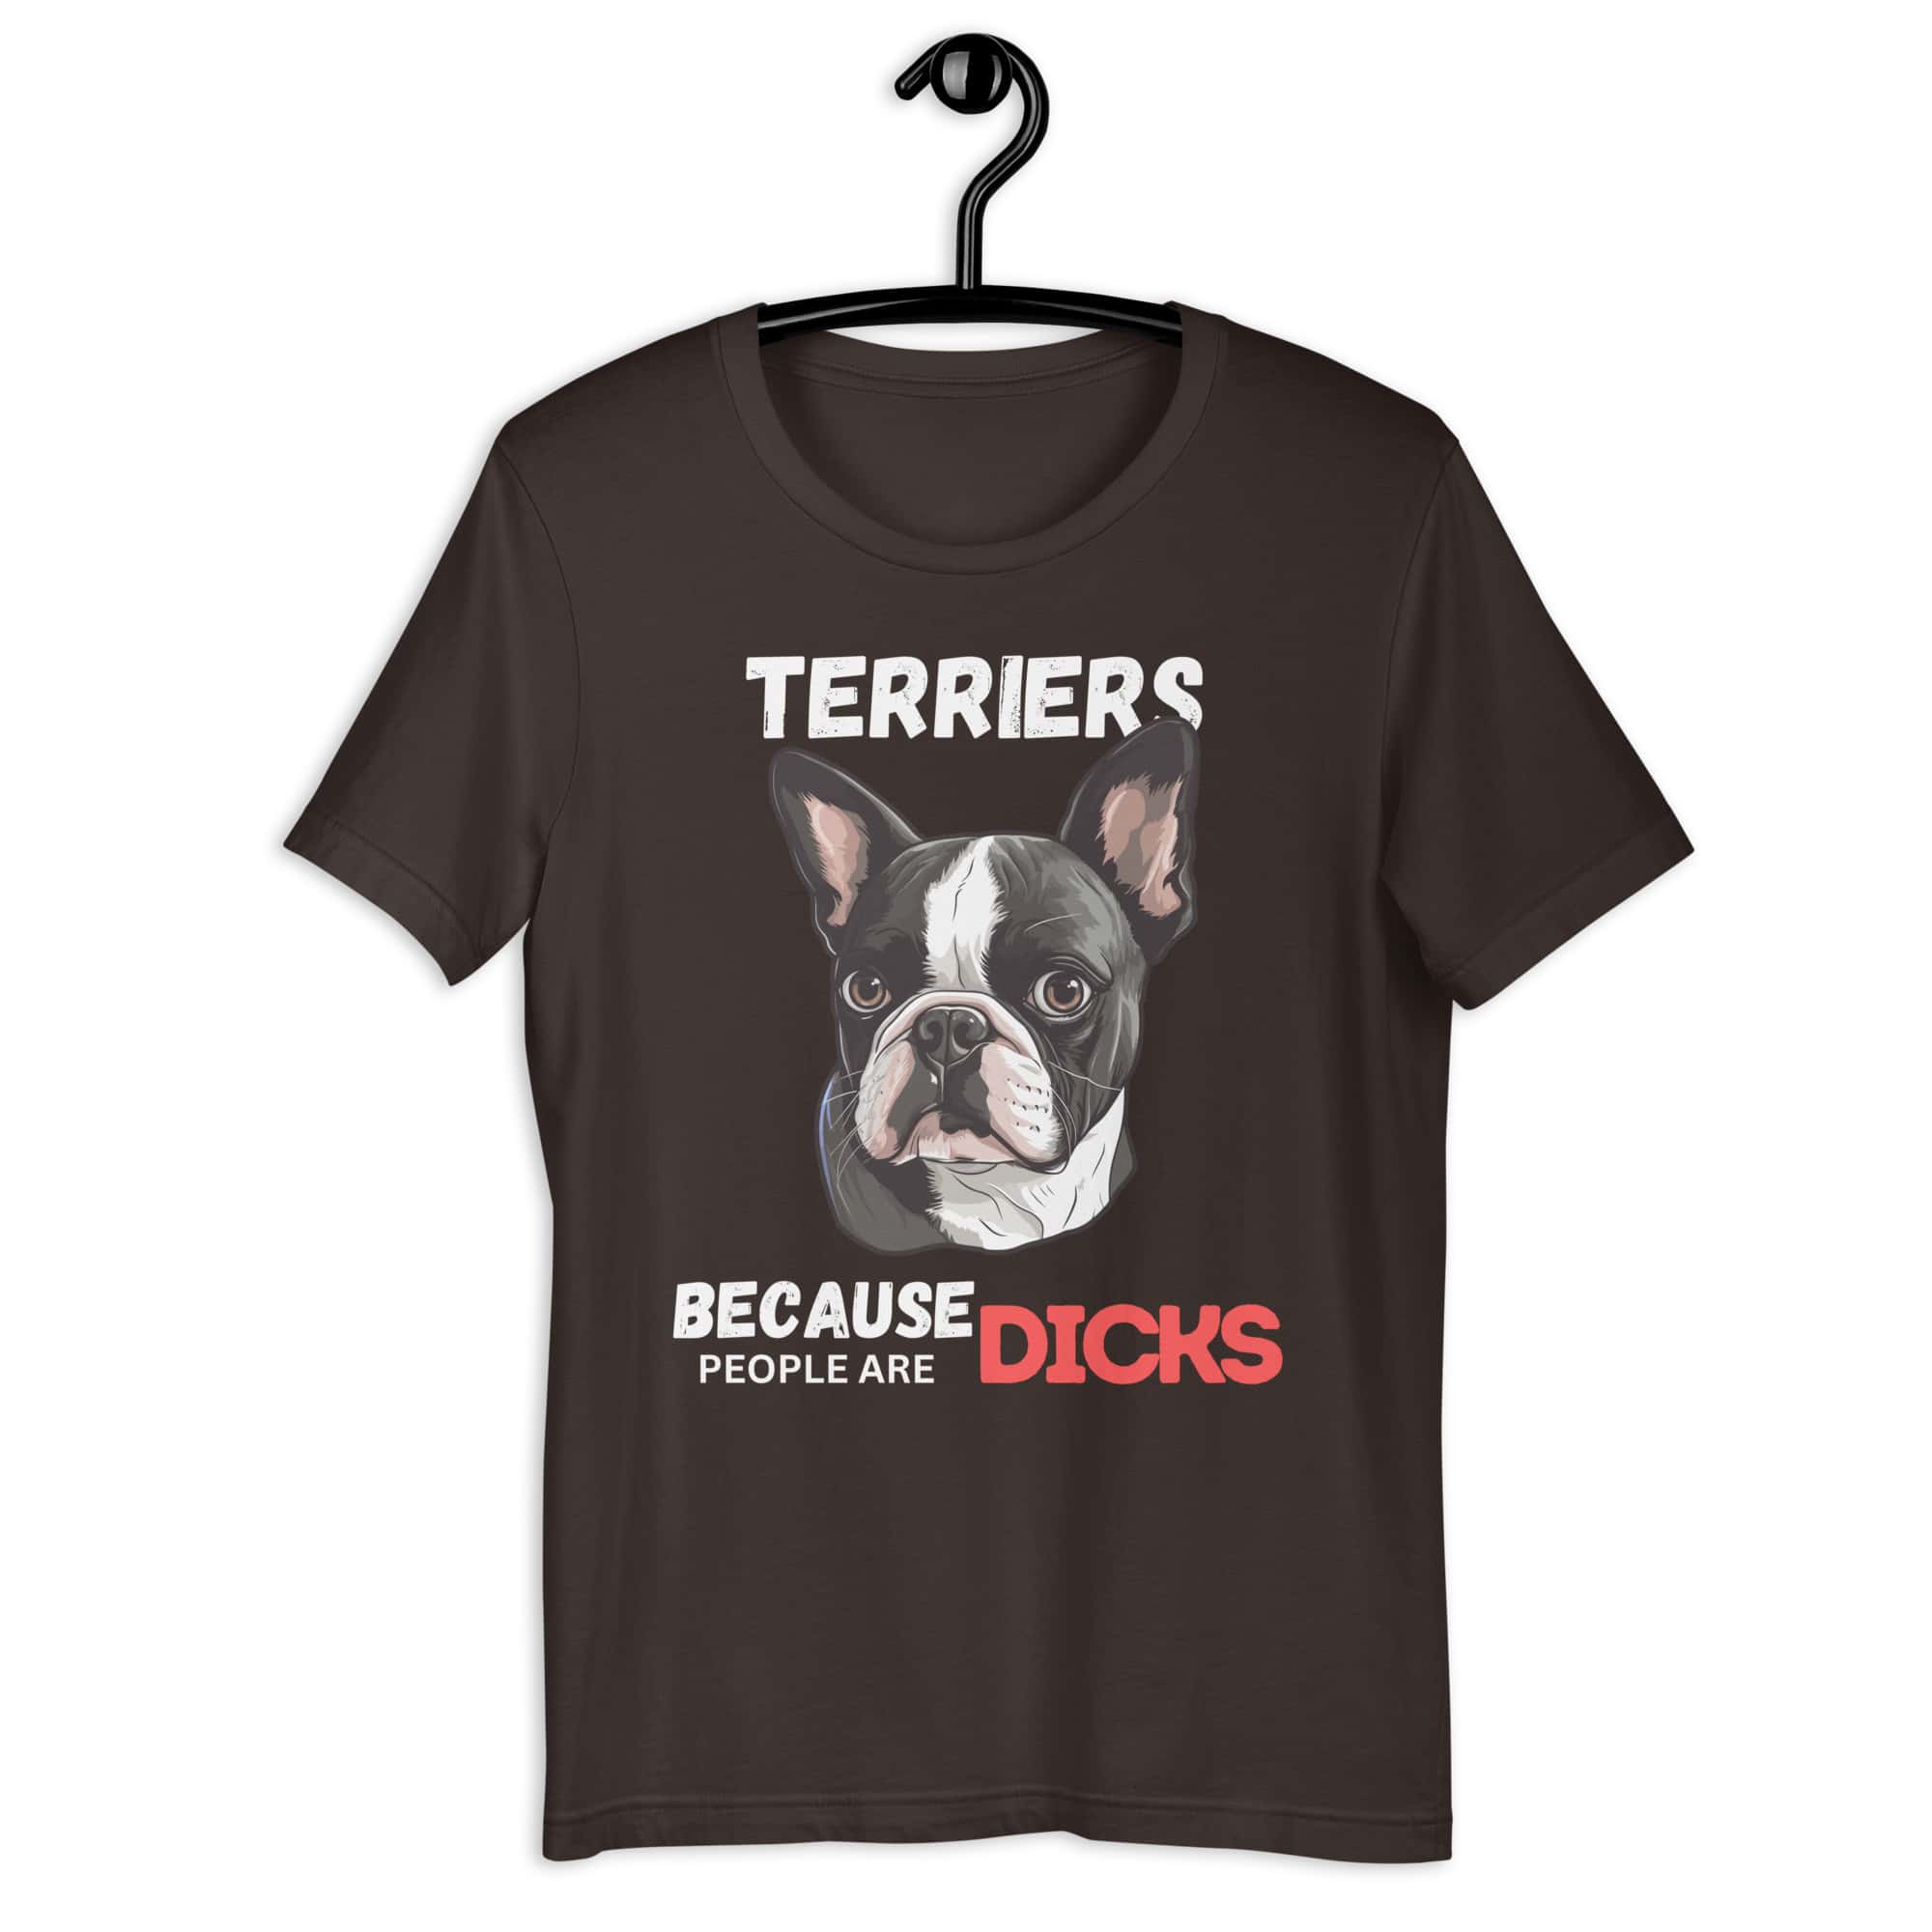 Terriers Because People Are Dicks Unisex T-Shirt Gray Black